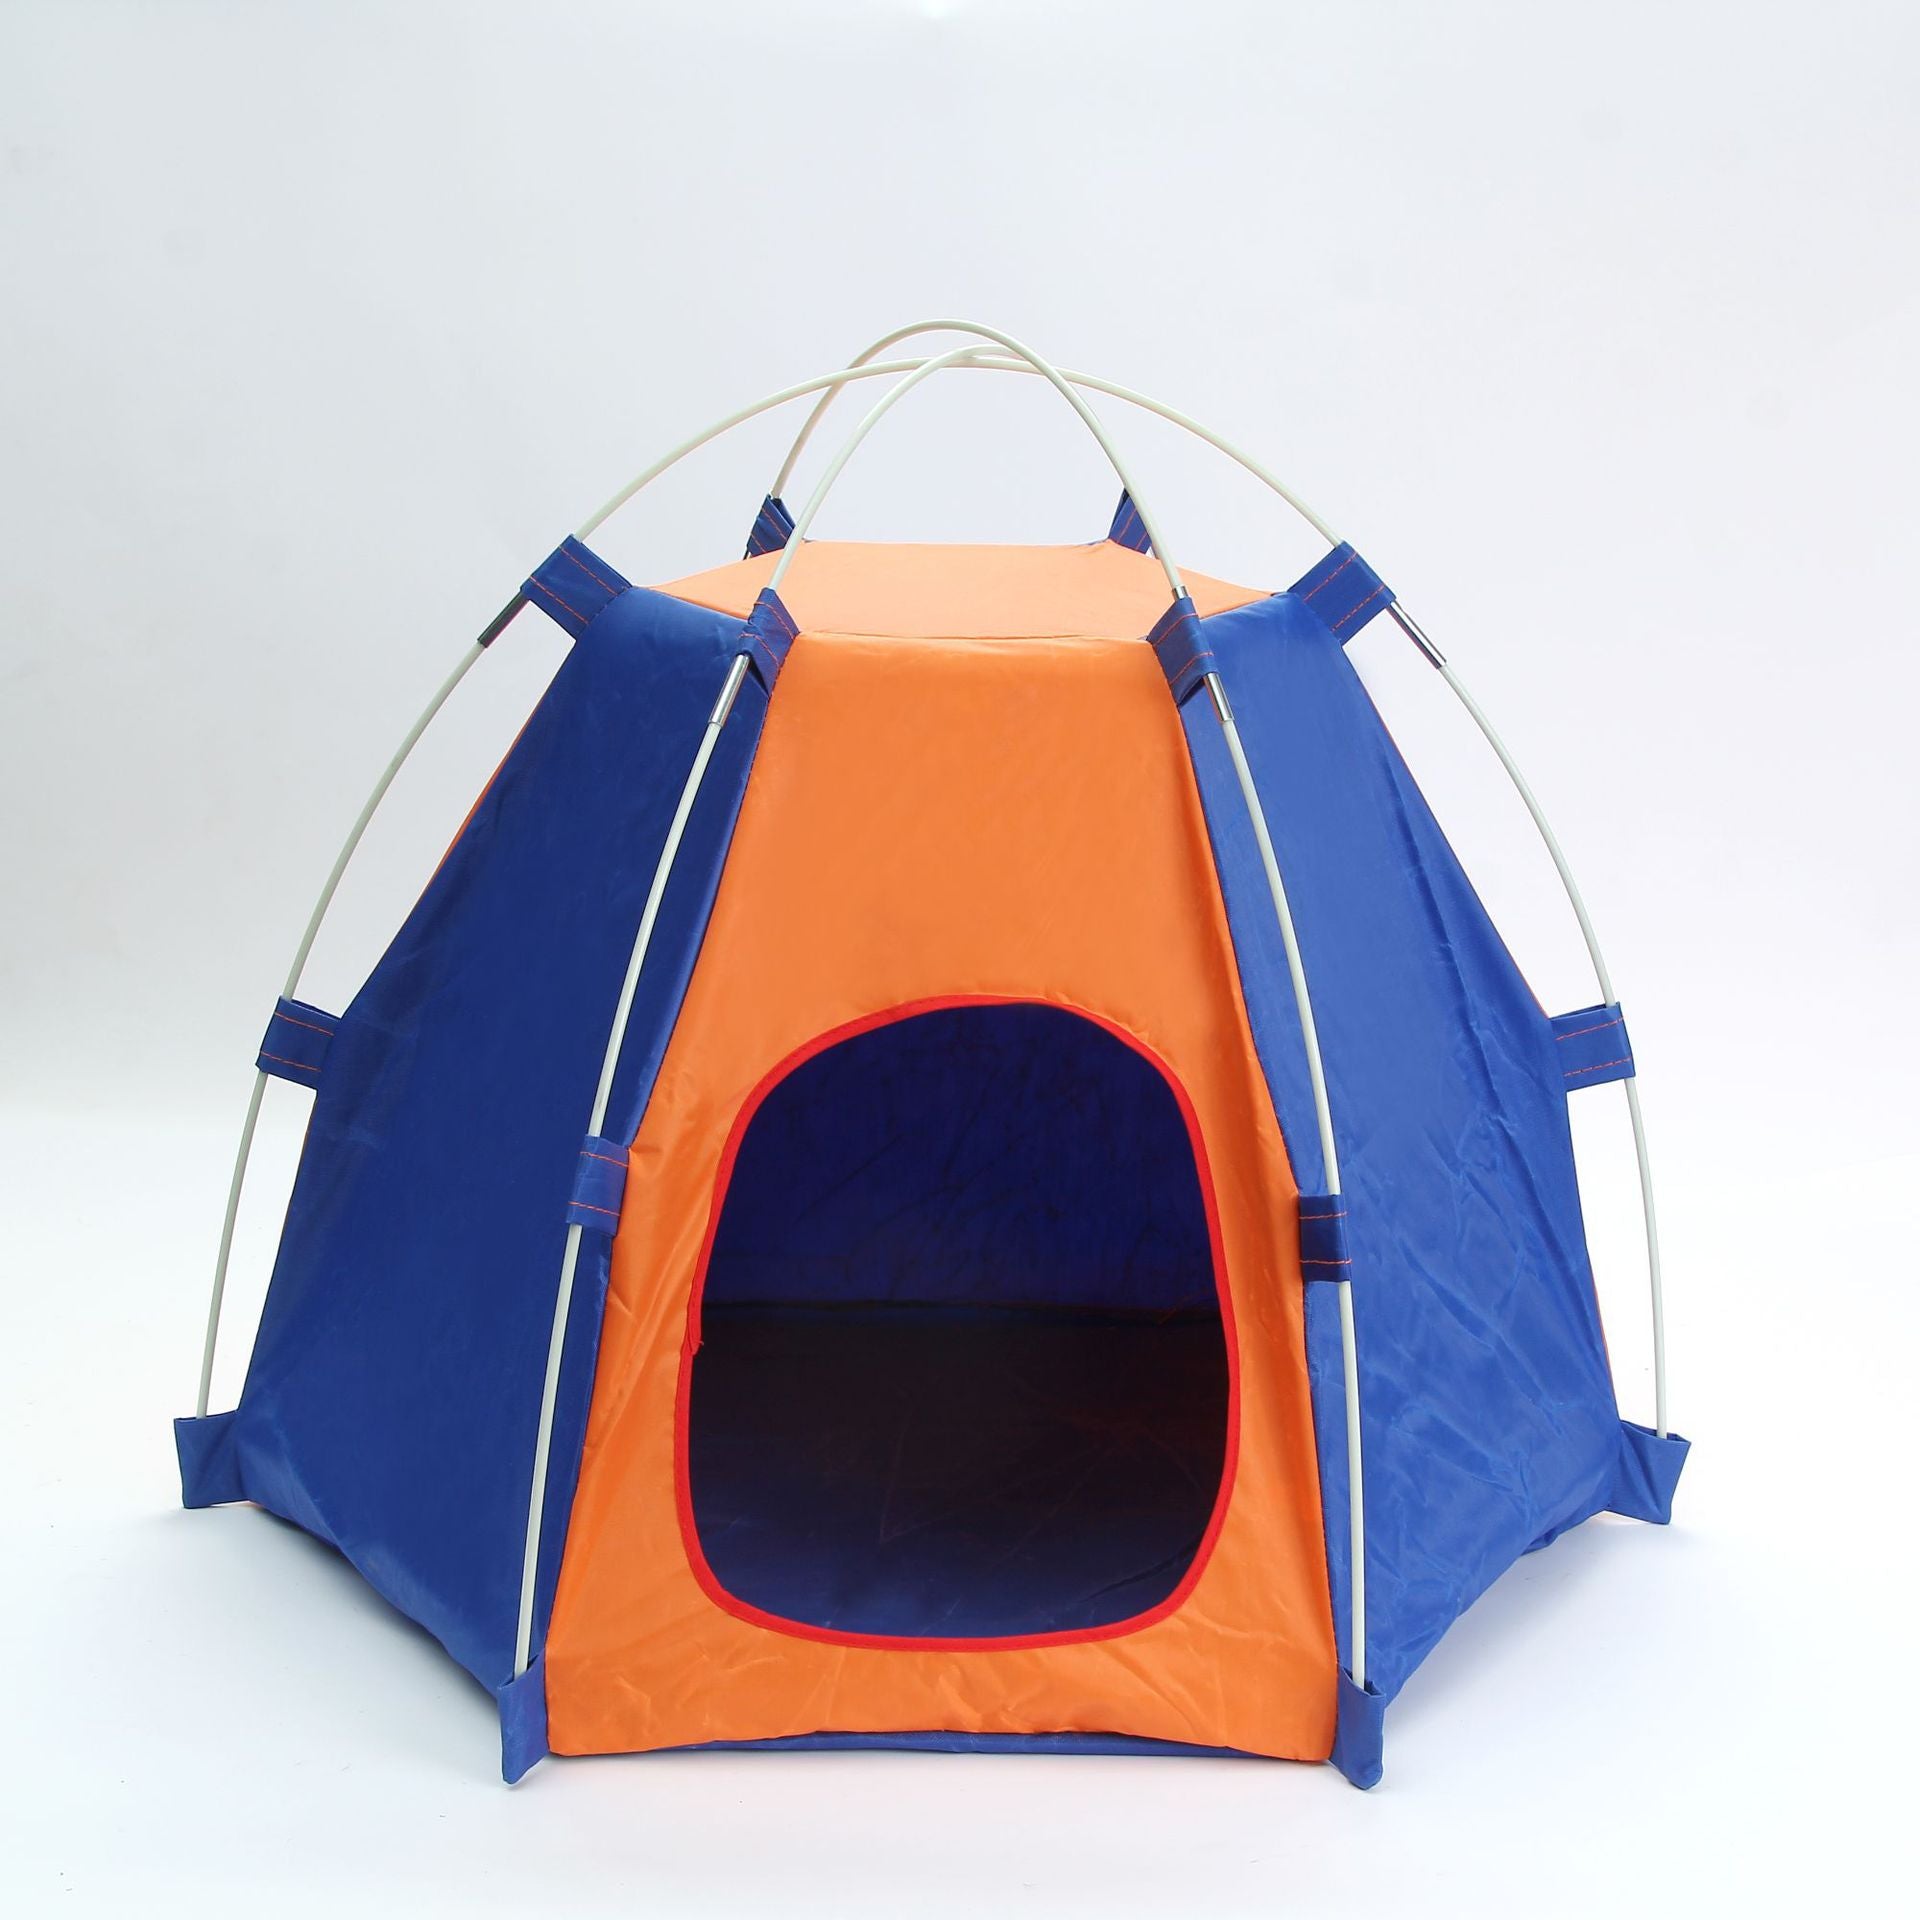 Whether you're relaxing in your backyard, hanging out at the beach, or camping, this small dog tent is perfect for your furry friend. The lightweight, moisture-proof, breathable material keeps your pet safe and secure. Easily folds up in its own carrying case for hassle-free stowaway. 